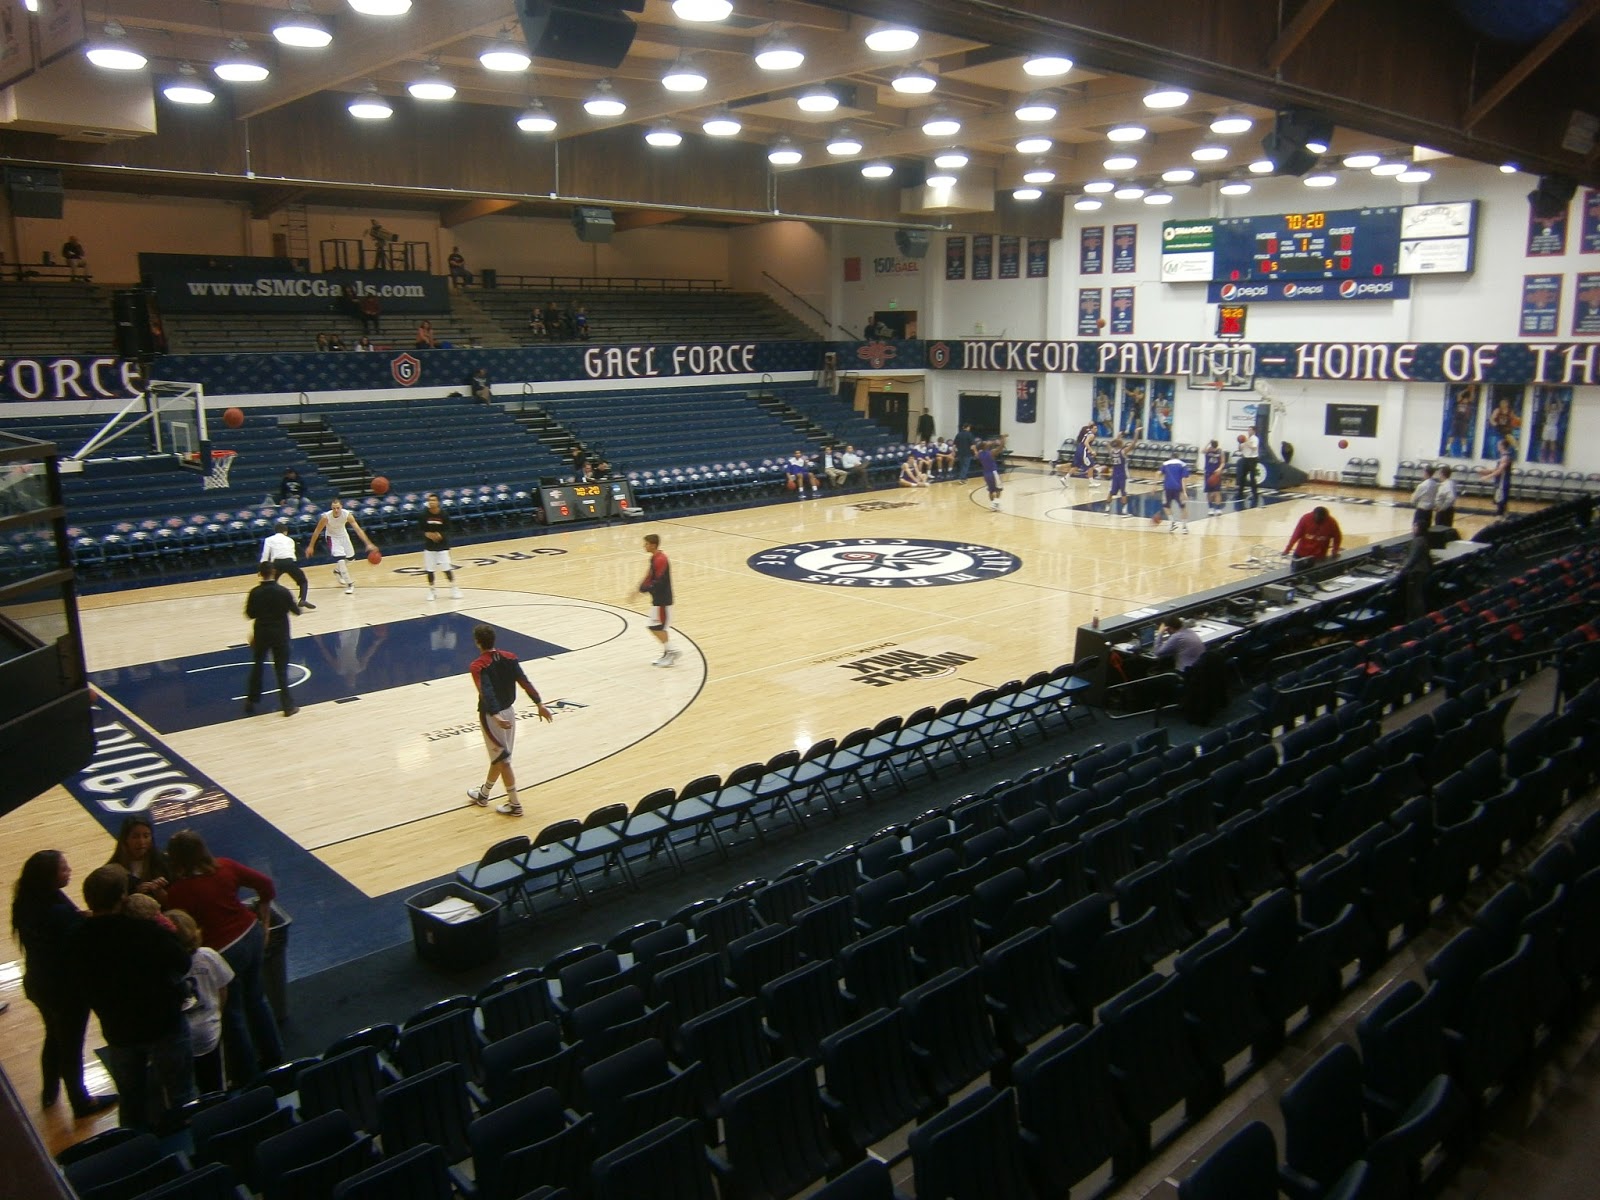 Adventures in Weseland: A Look at McKeon Pavilion-Home of the St.Mary's